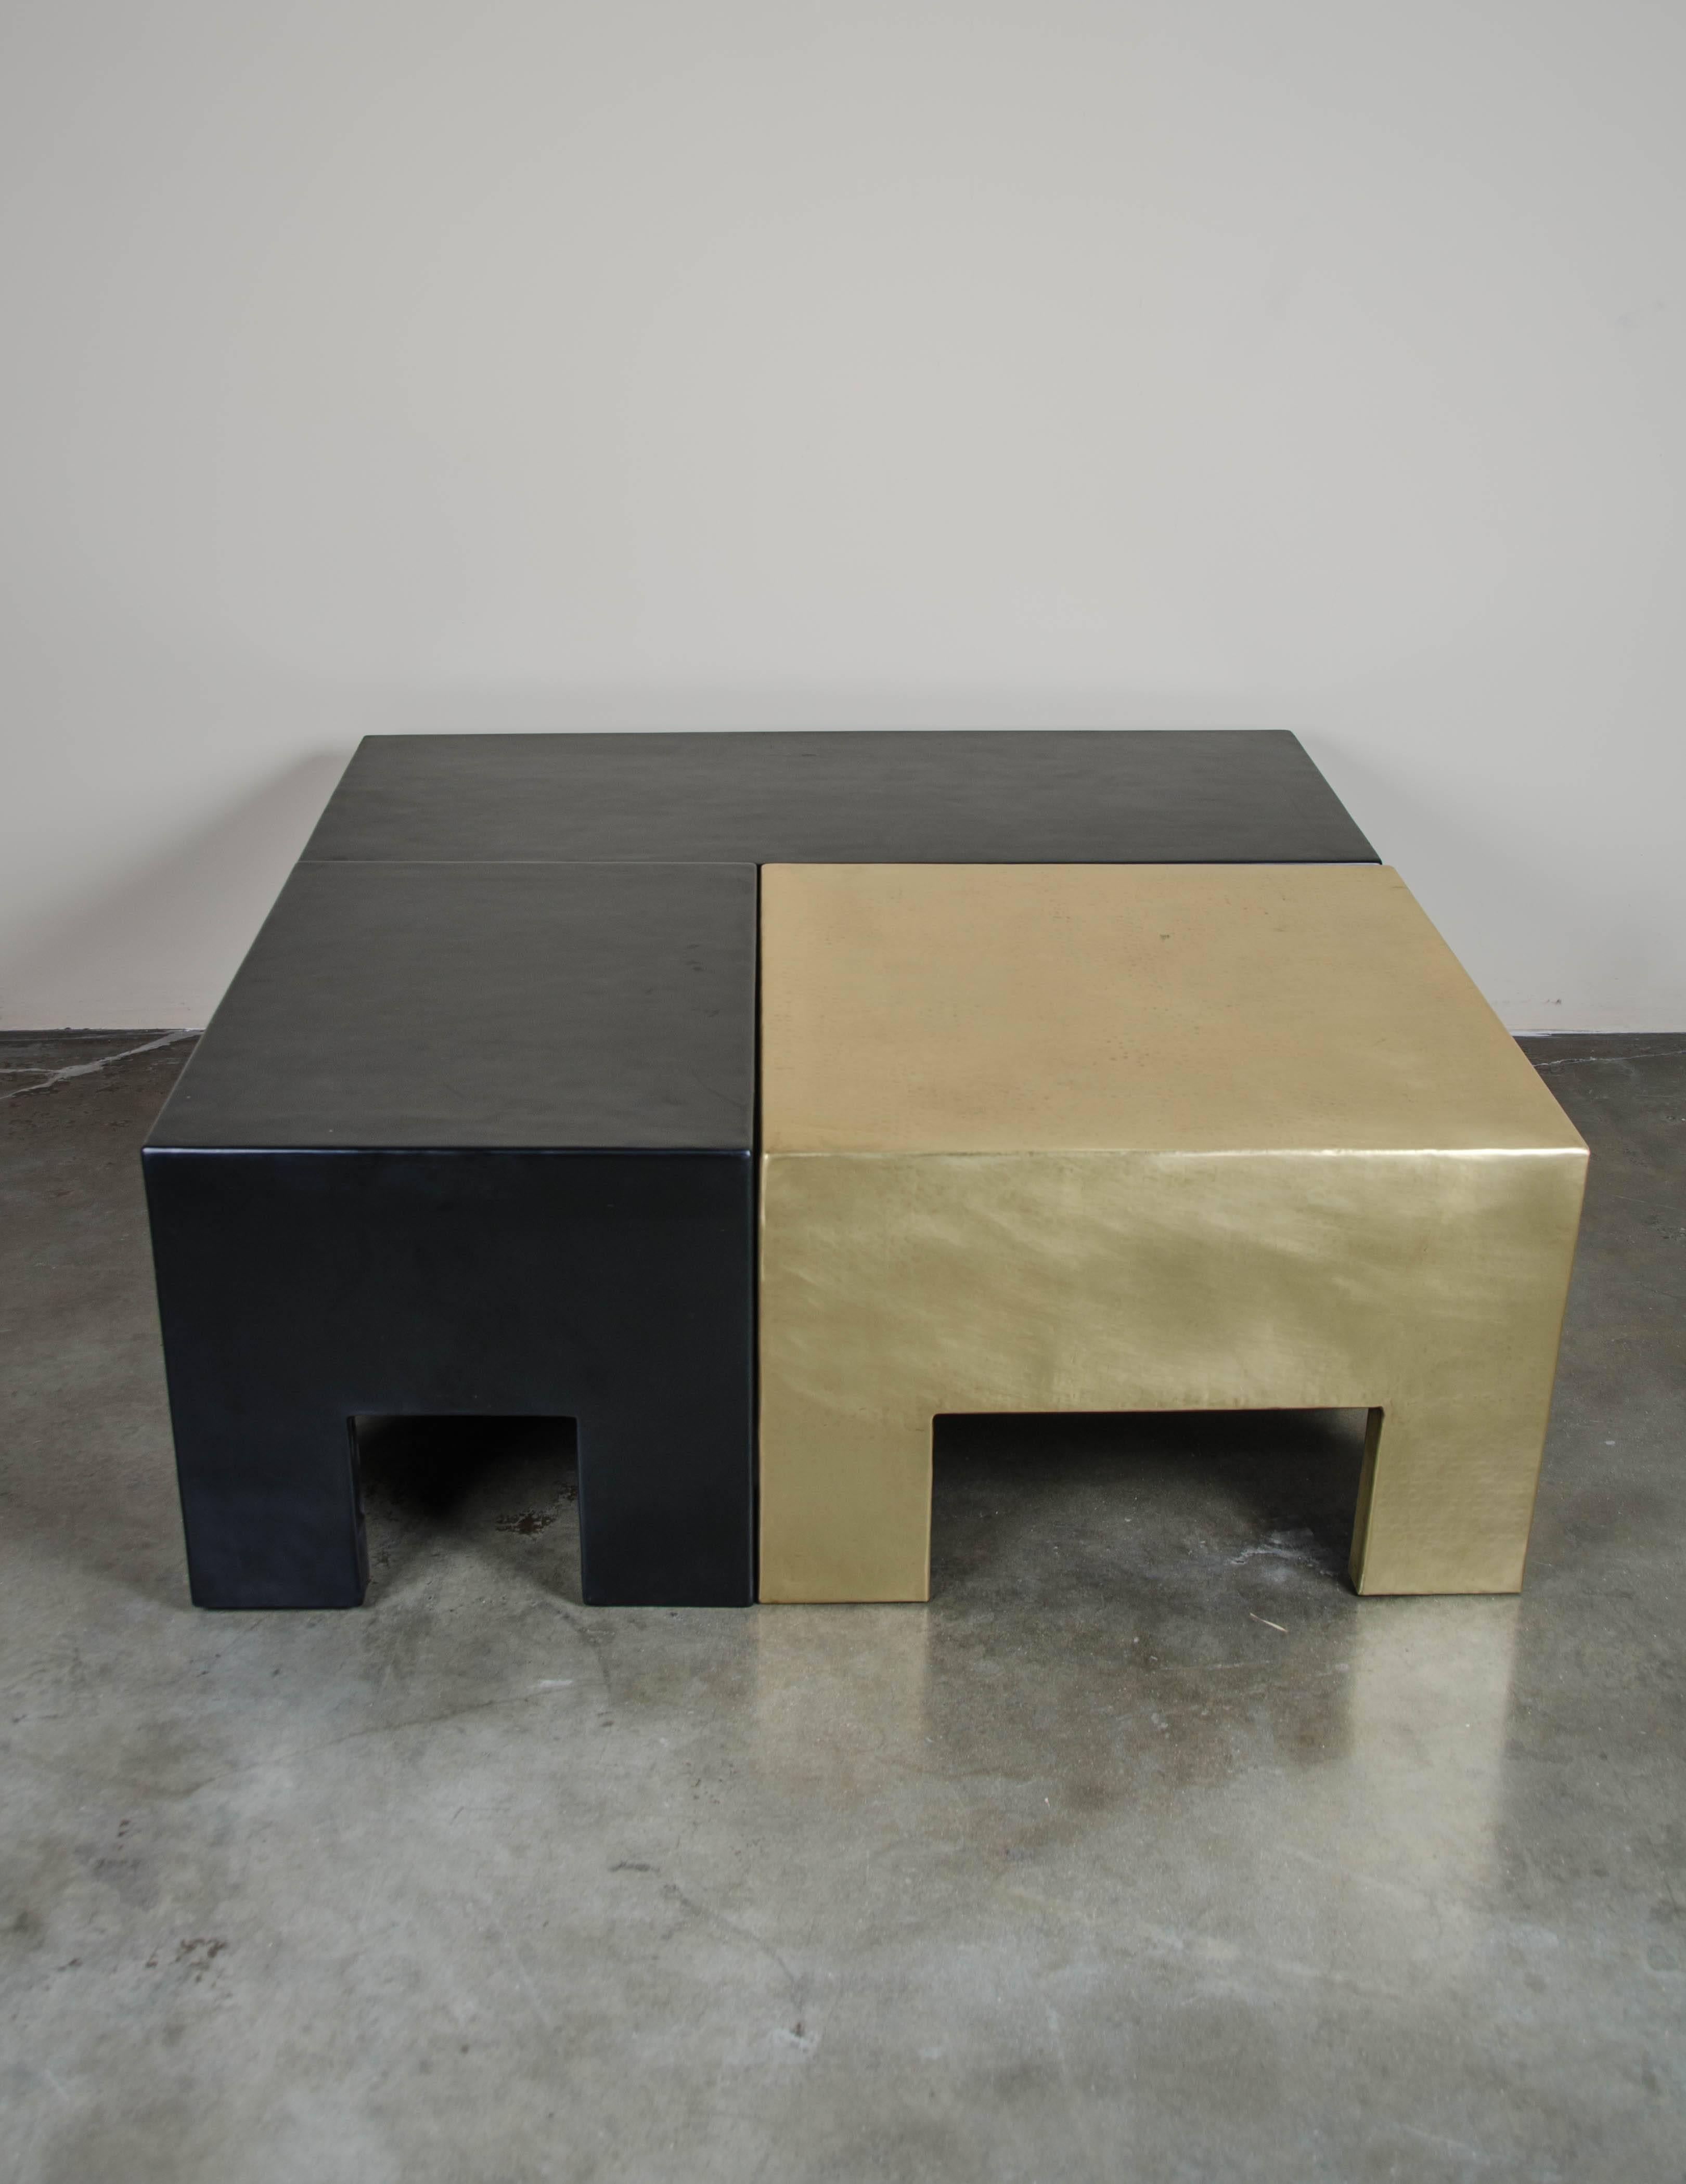 Sectional coffee table (Set of three)
Black lacquer
Brass
Hand repoussé
Limited edition

Section 1: 28